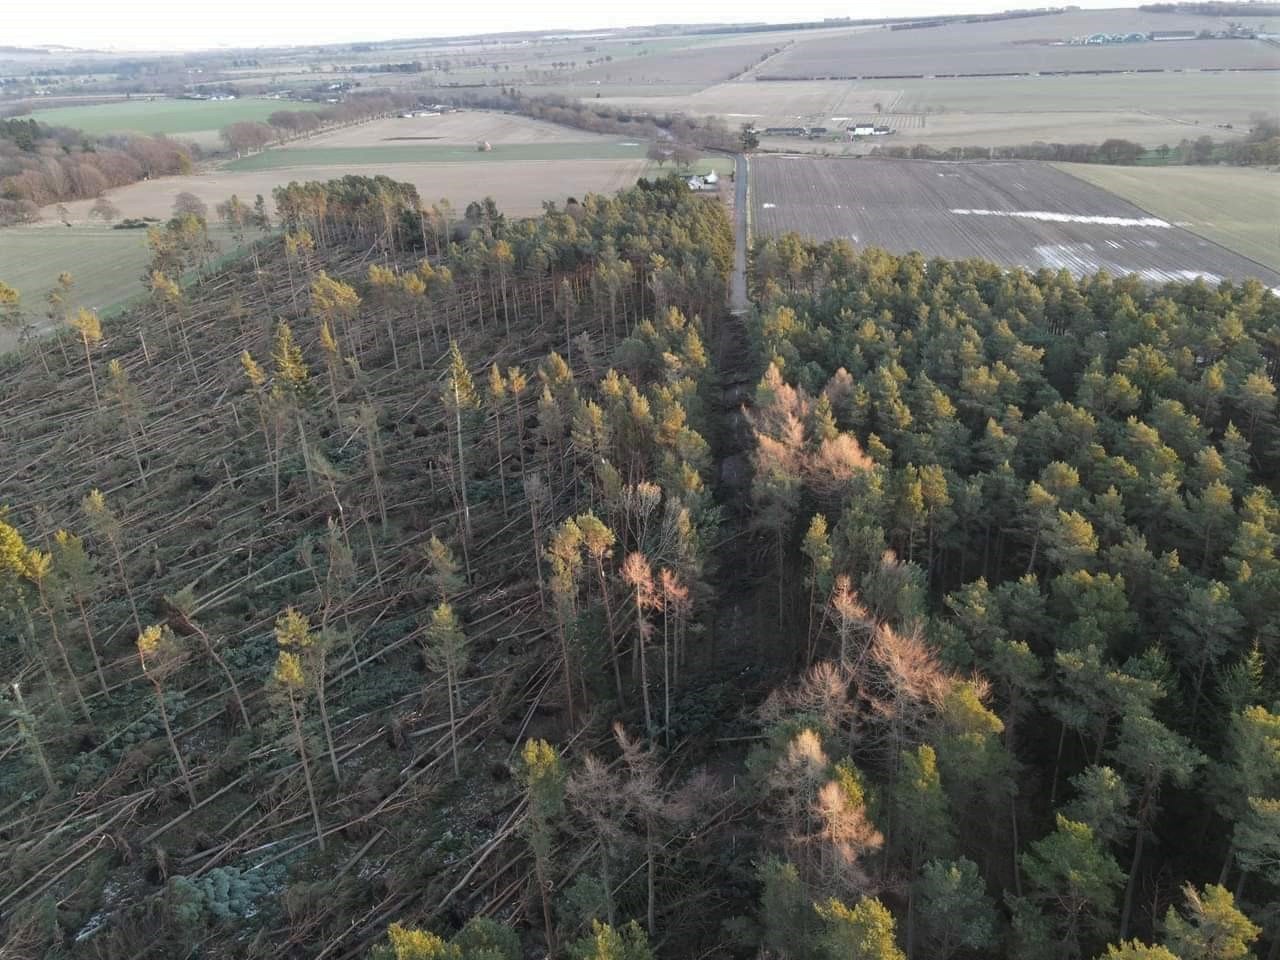 Diverse forests needed to cope with storm damage